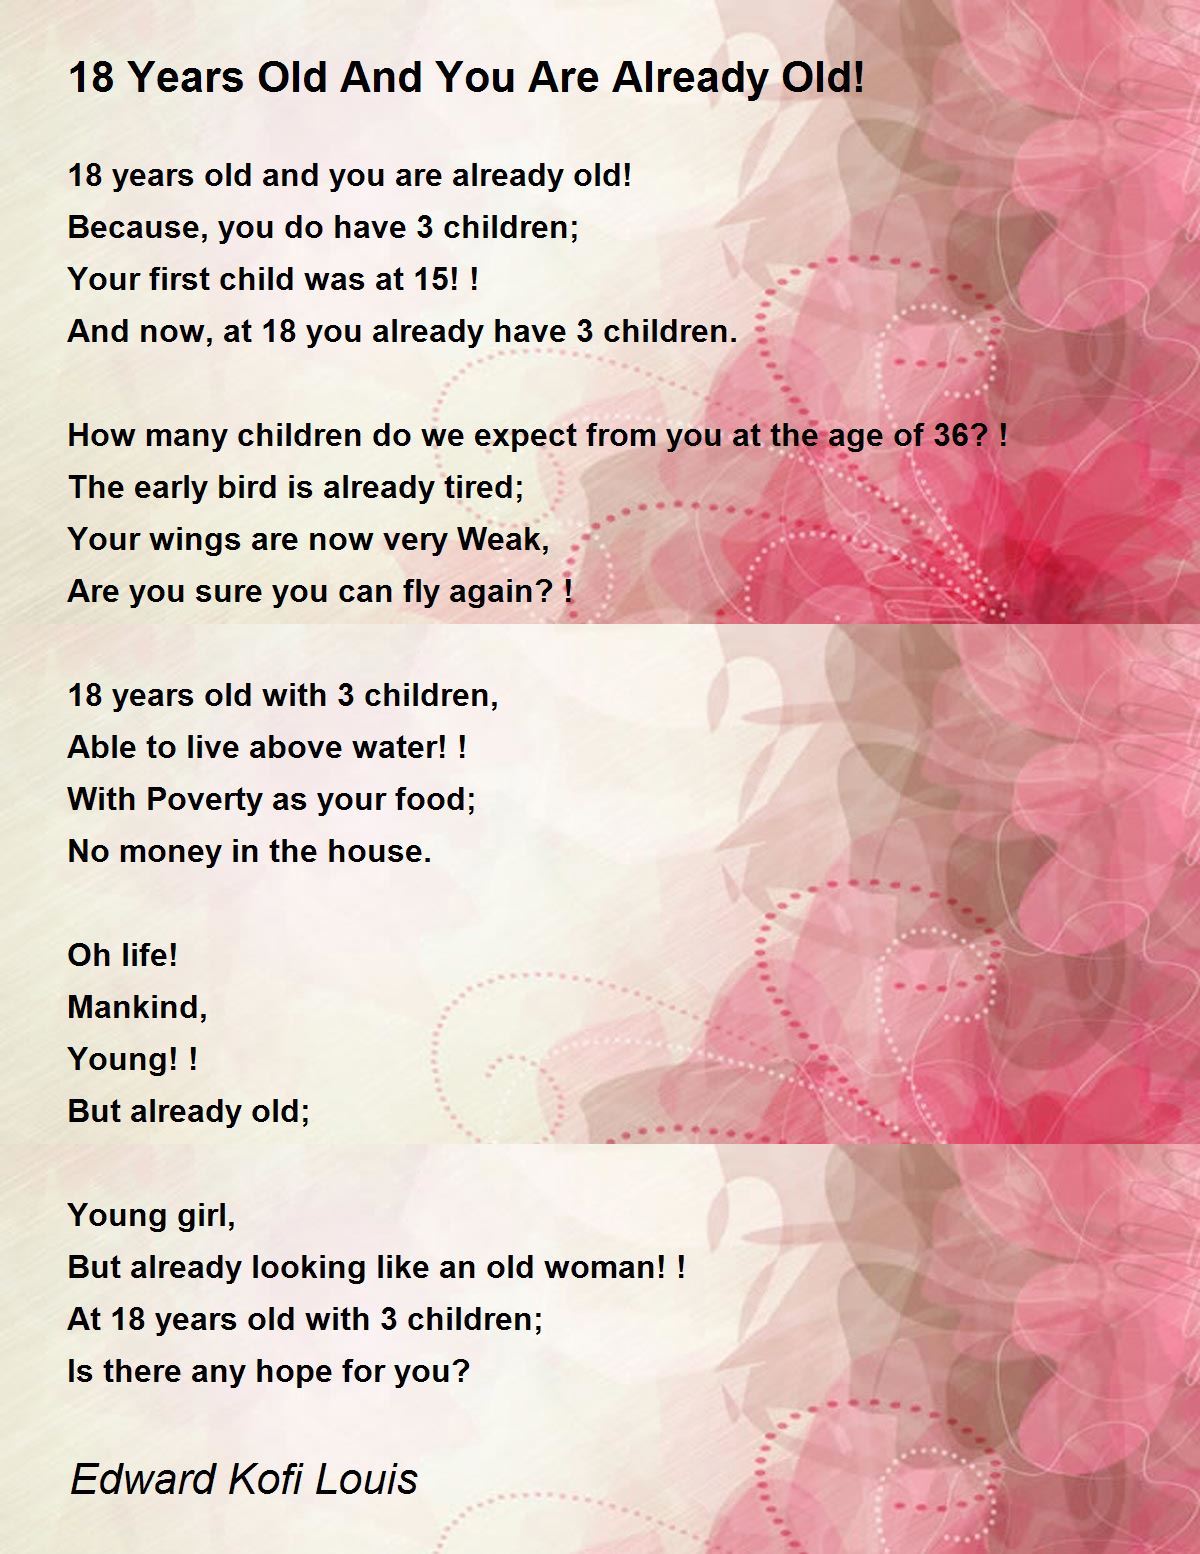 18 Years Old And You Are Already Old! - 18 Years Old And You Are Already Old!  Poem by Edward Kofi Louis